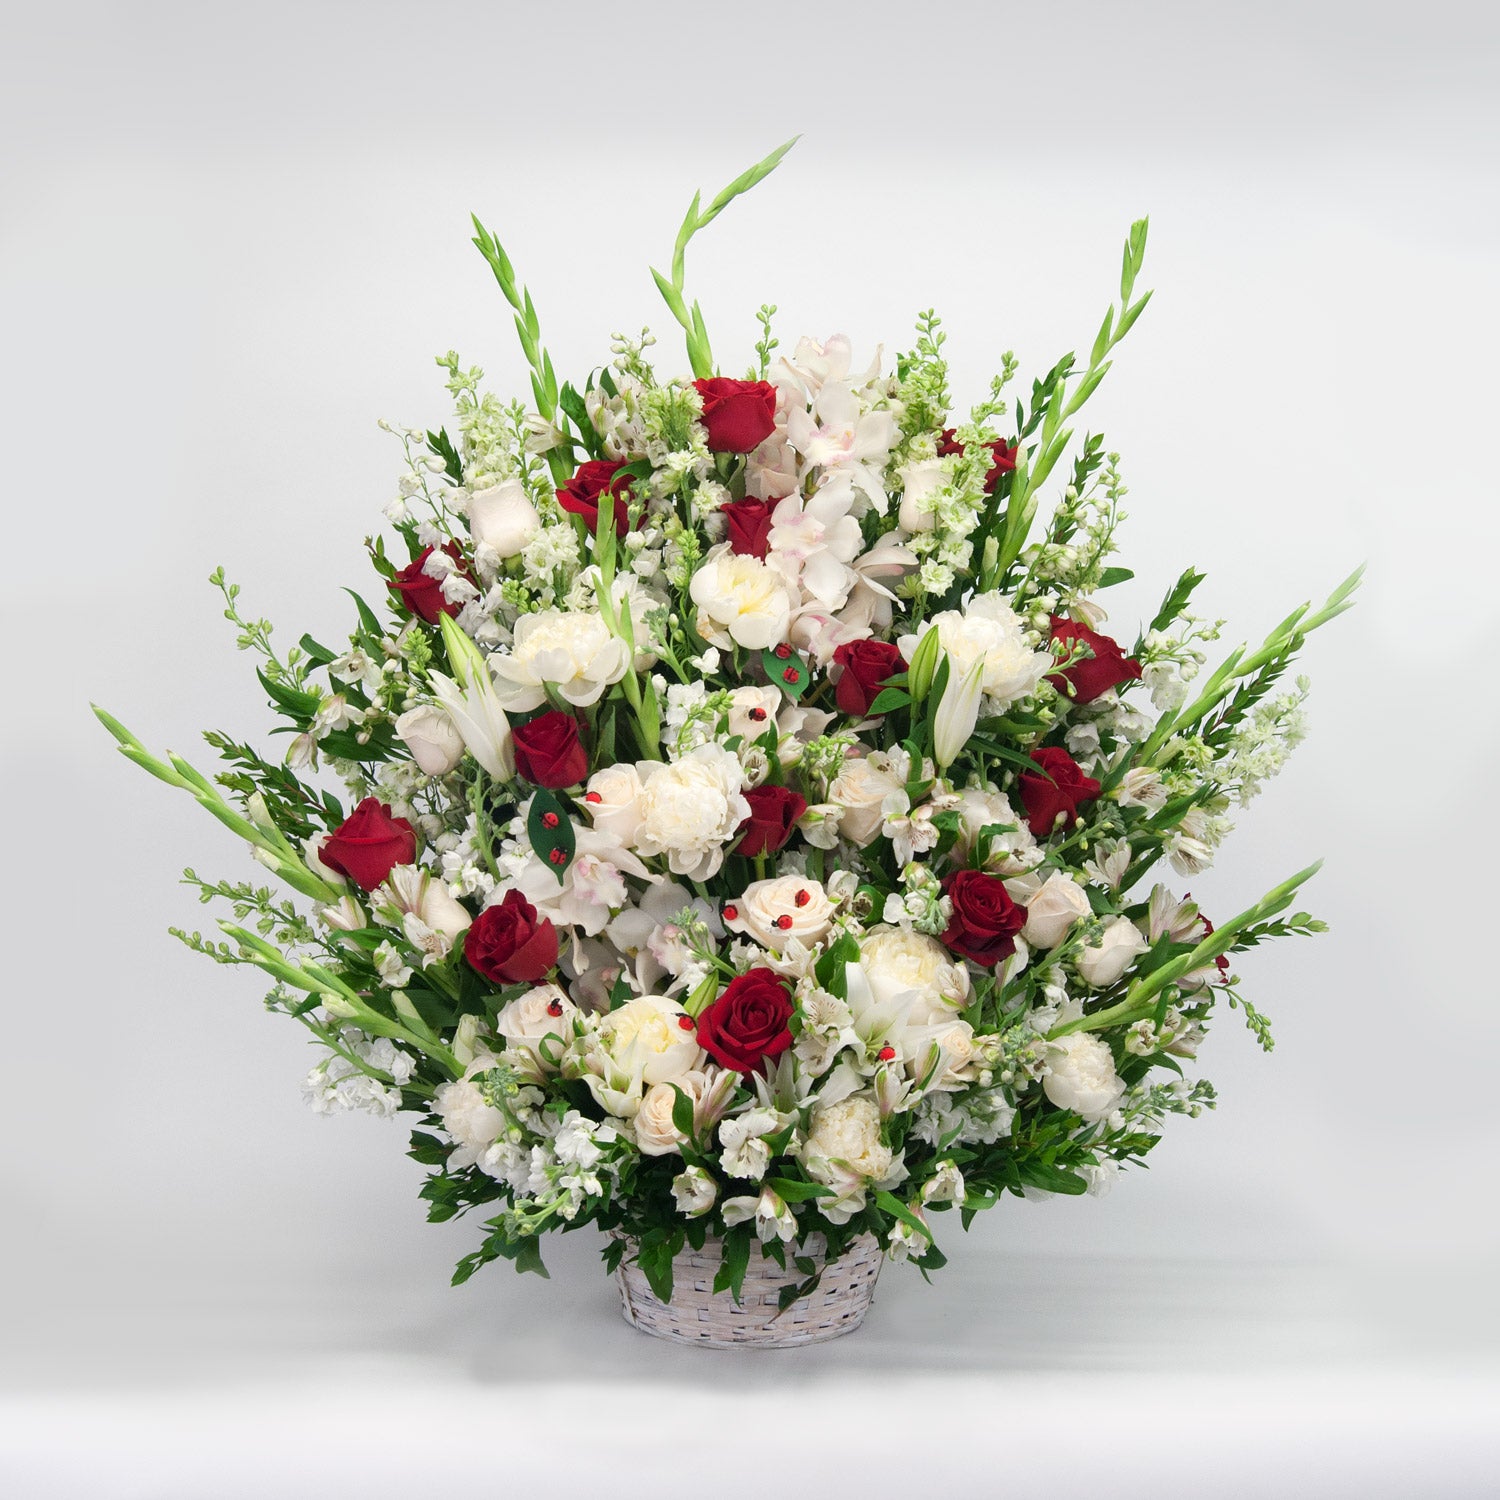 White and Red Sympathy Basket